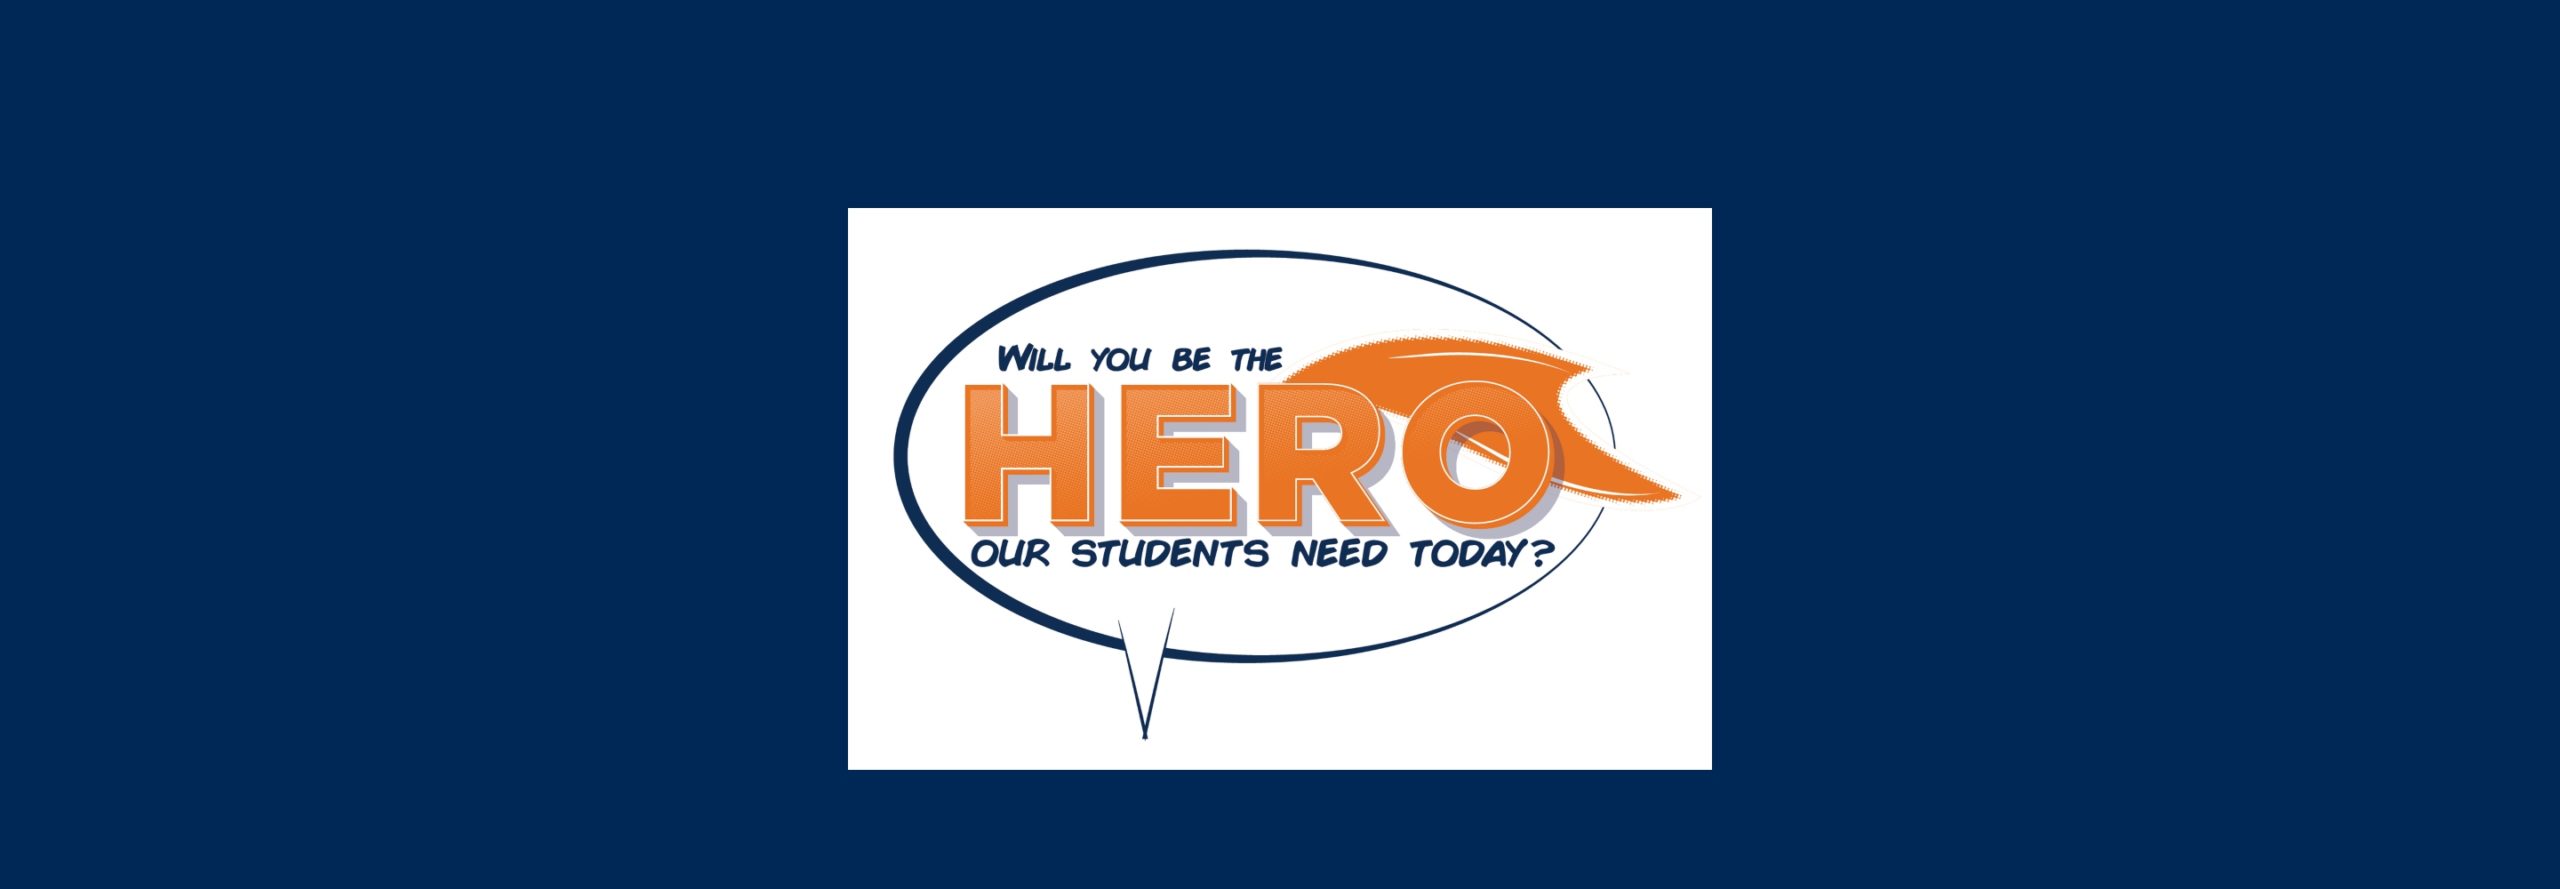 Will you be the hero our students need today?